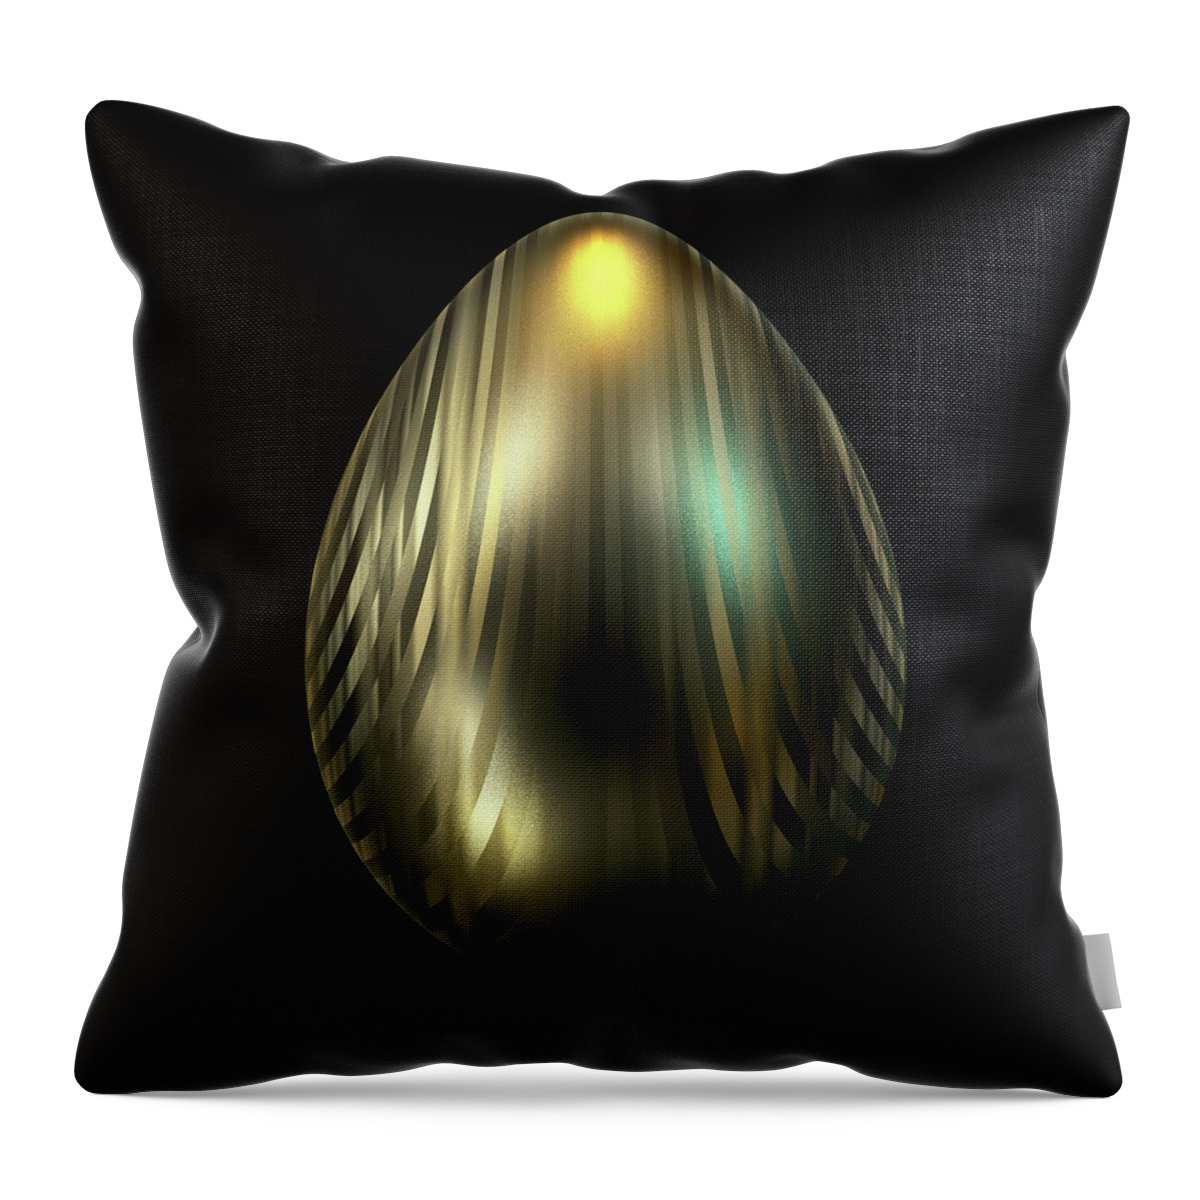 Series Throw Pillow featuring the digital art Egg with Lines of Gold by Hakon Soreide